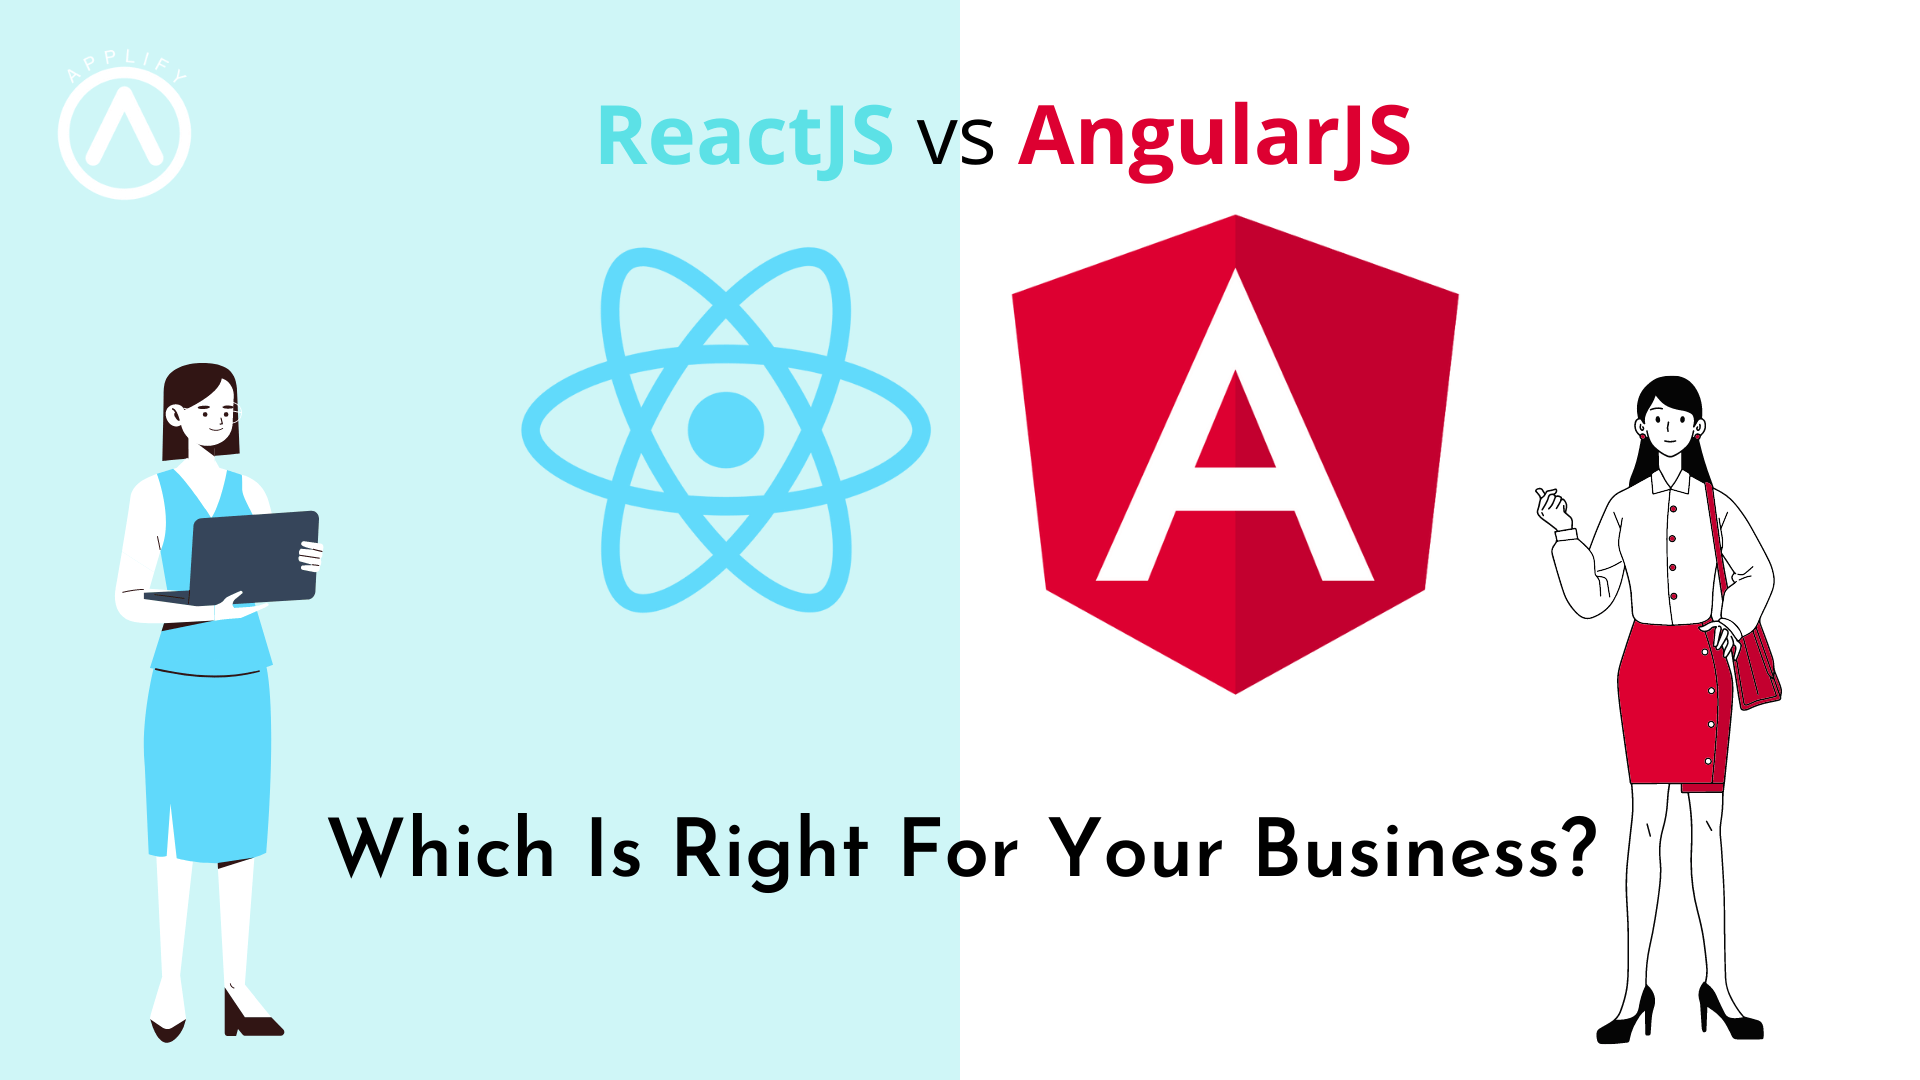 ReactJS vs AngularJS: Which is better for your business?